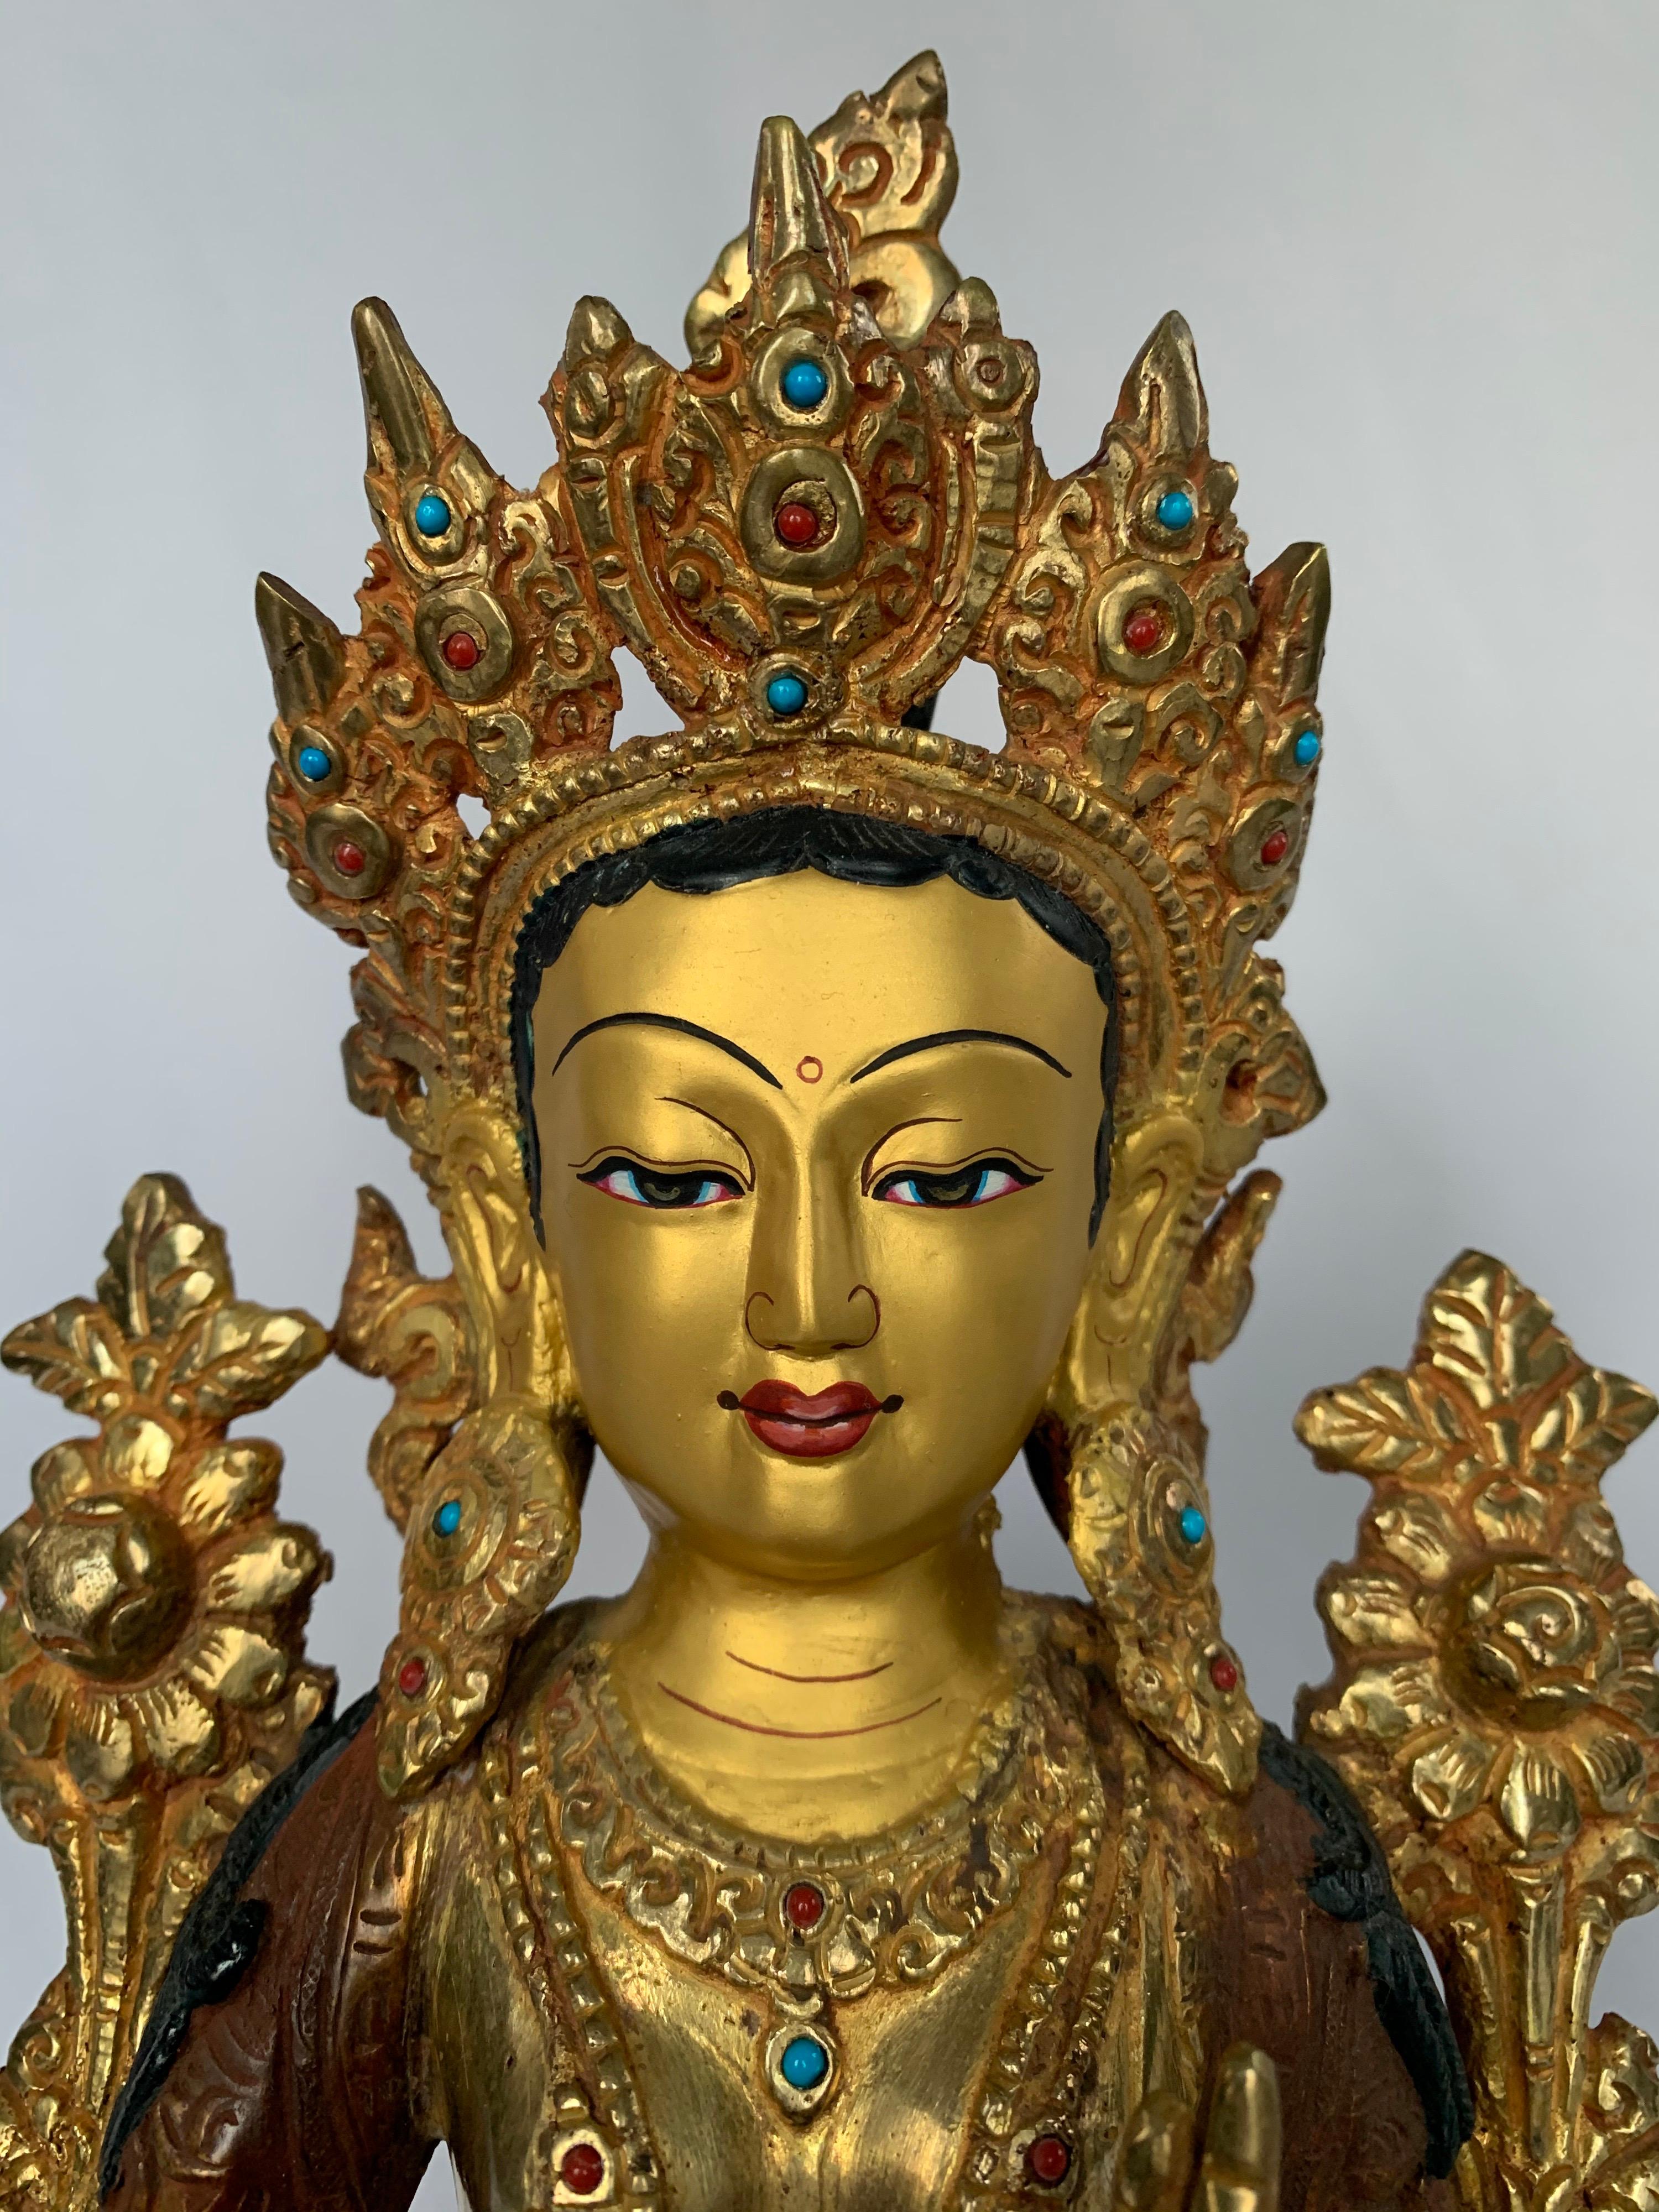 Green Tara Statue 12.5 Inch with 24K Gold Handcrafted by Lost Wax Process - Gray Figurative Sculpture by Unknown